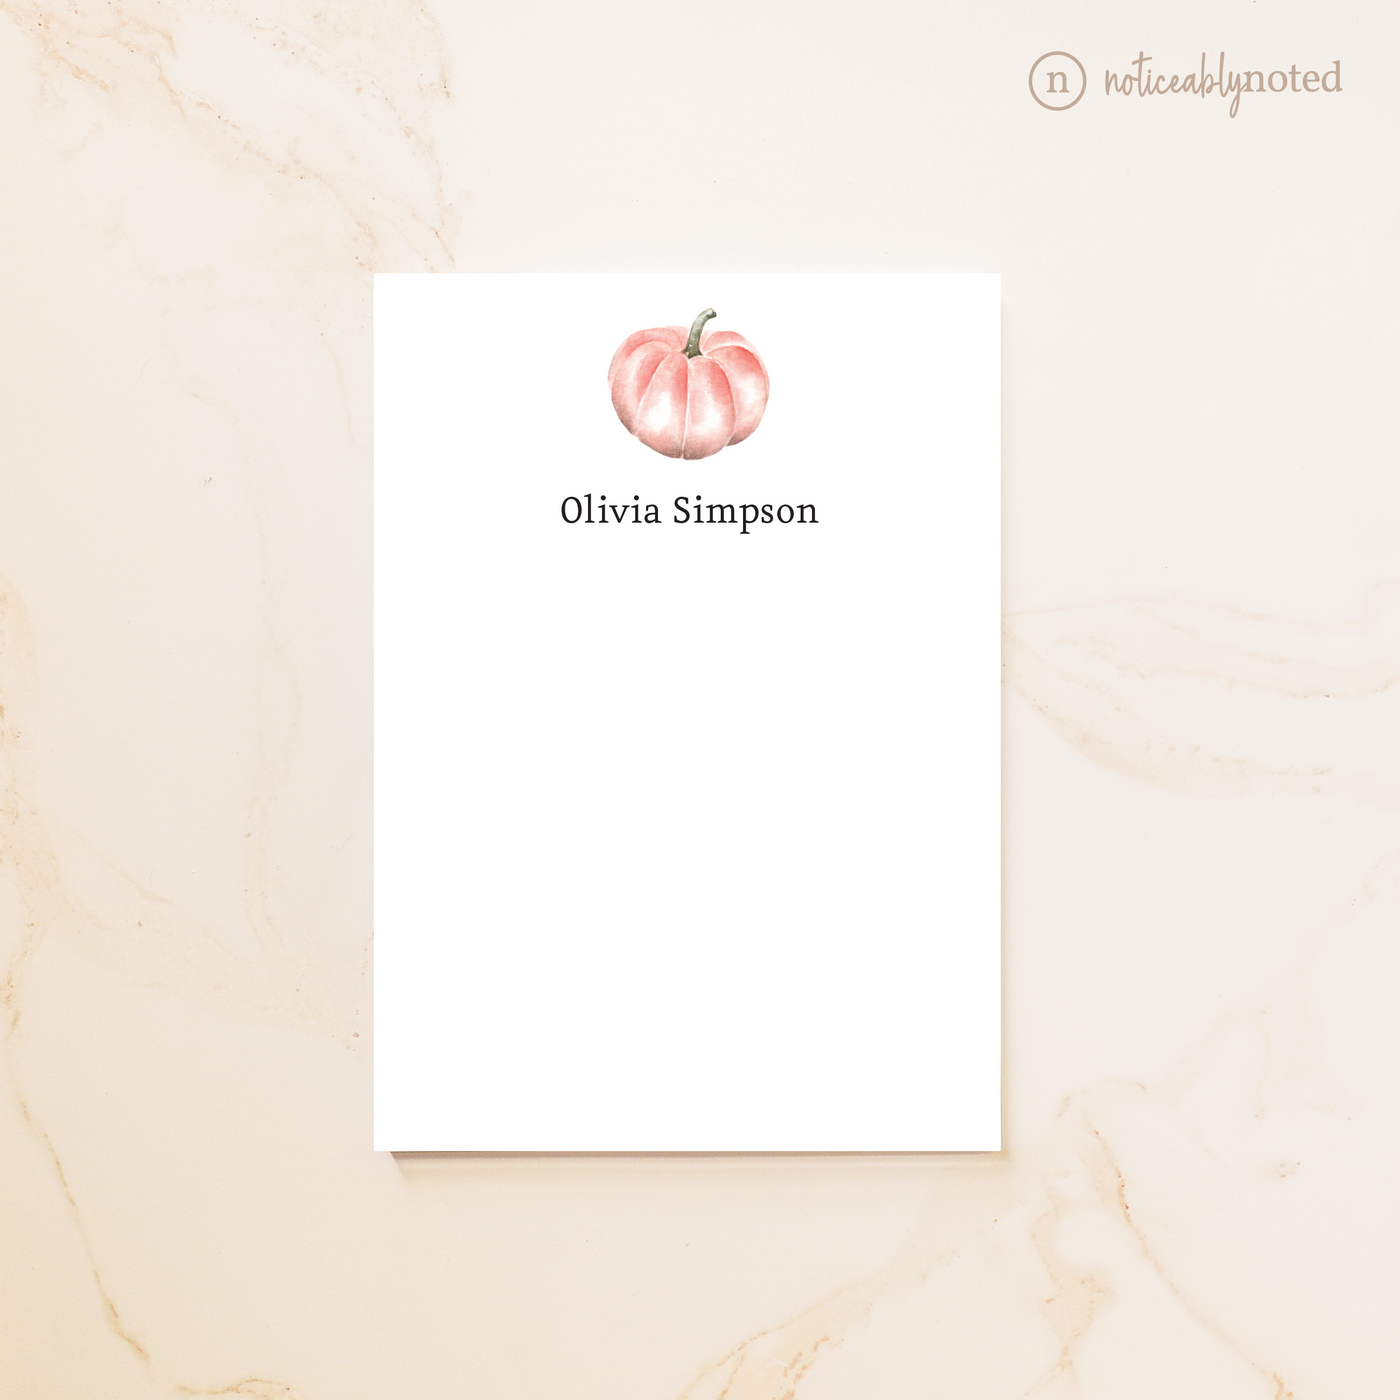 Pink Pumpkin Personalized Notepad